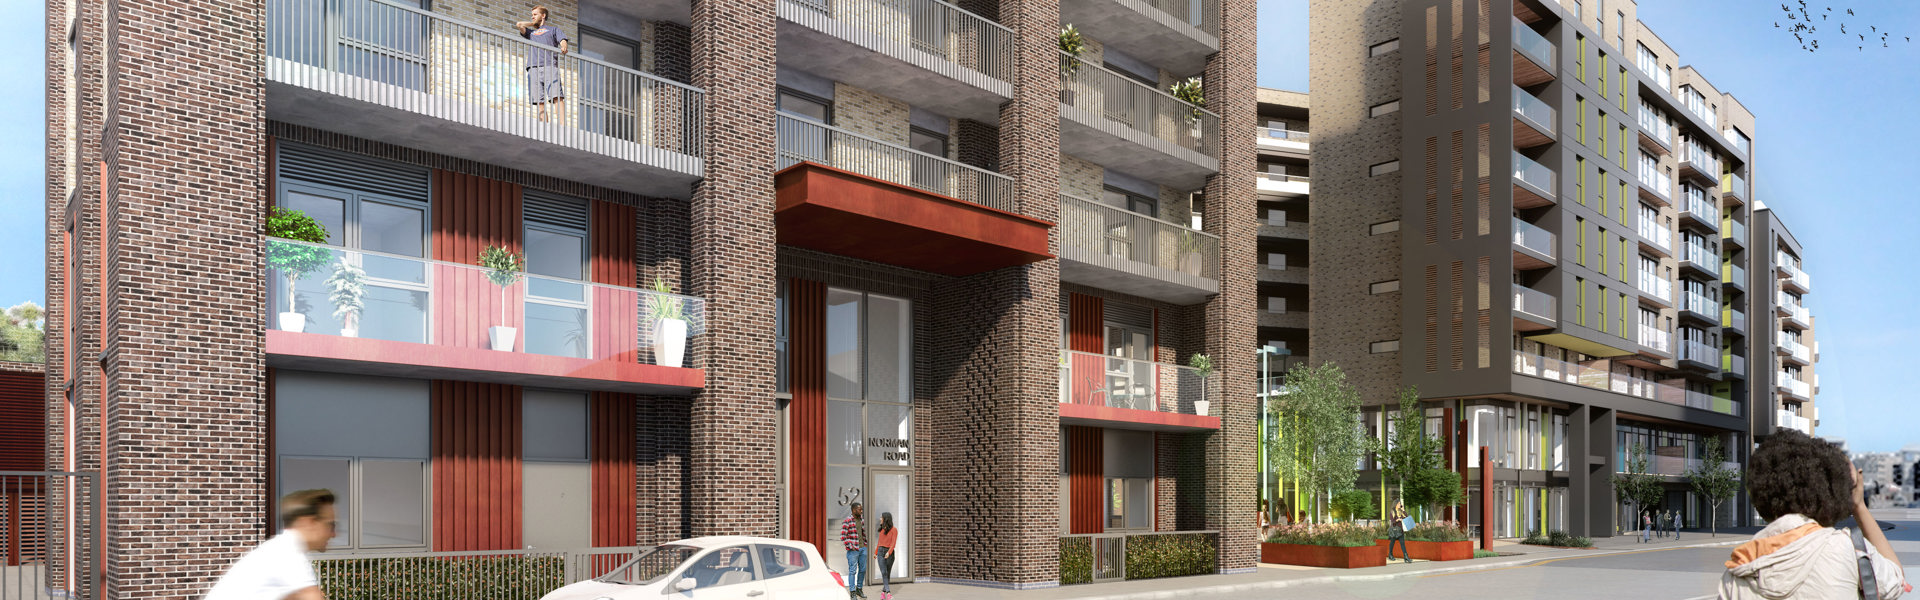 Saxon Wharf CGI View From Norman Road Looking Onto Communal Residential Entrance